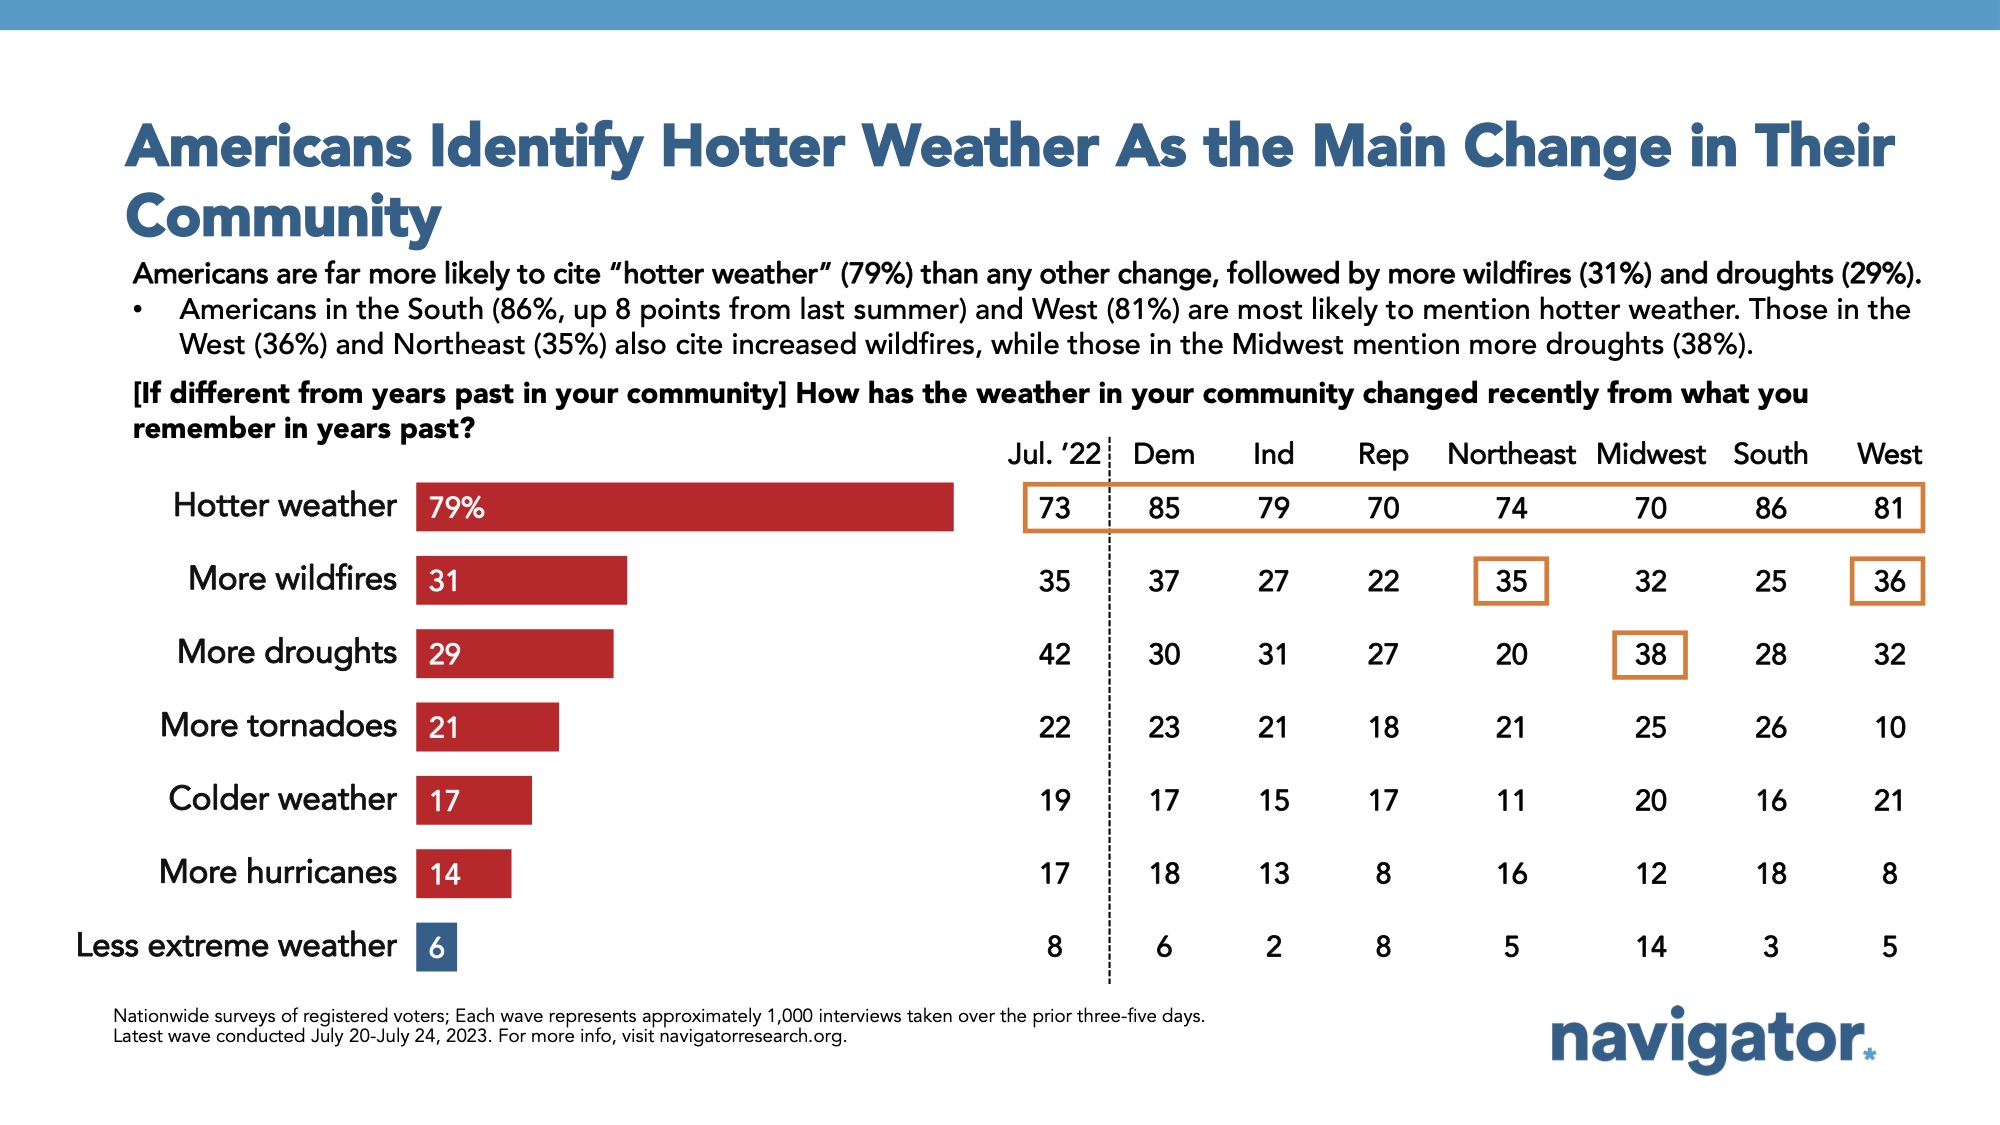 Survey results to the following prompt: [If different from years past in your community] How has the weather in your community changed recently from what you remember in years past?